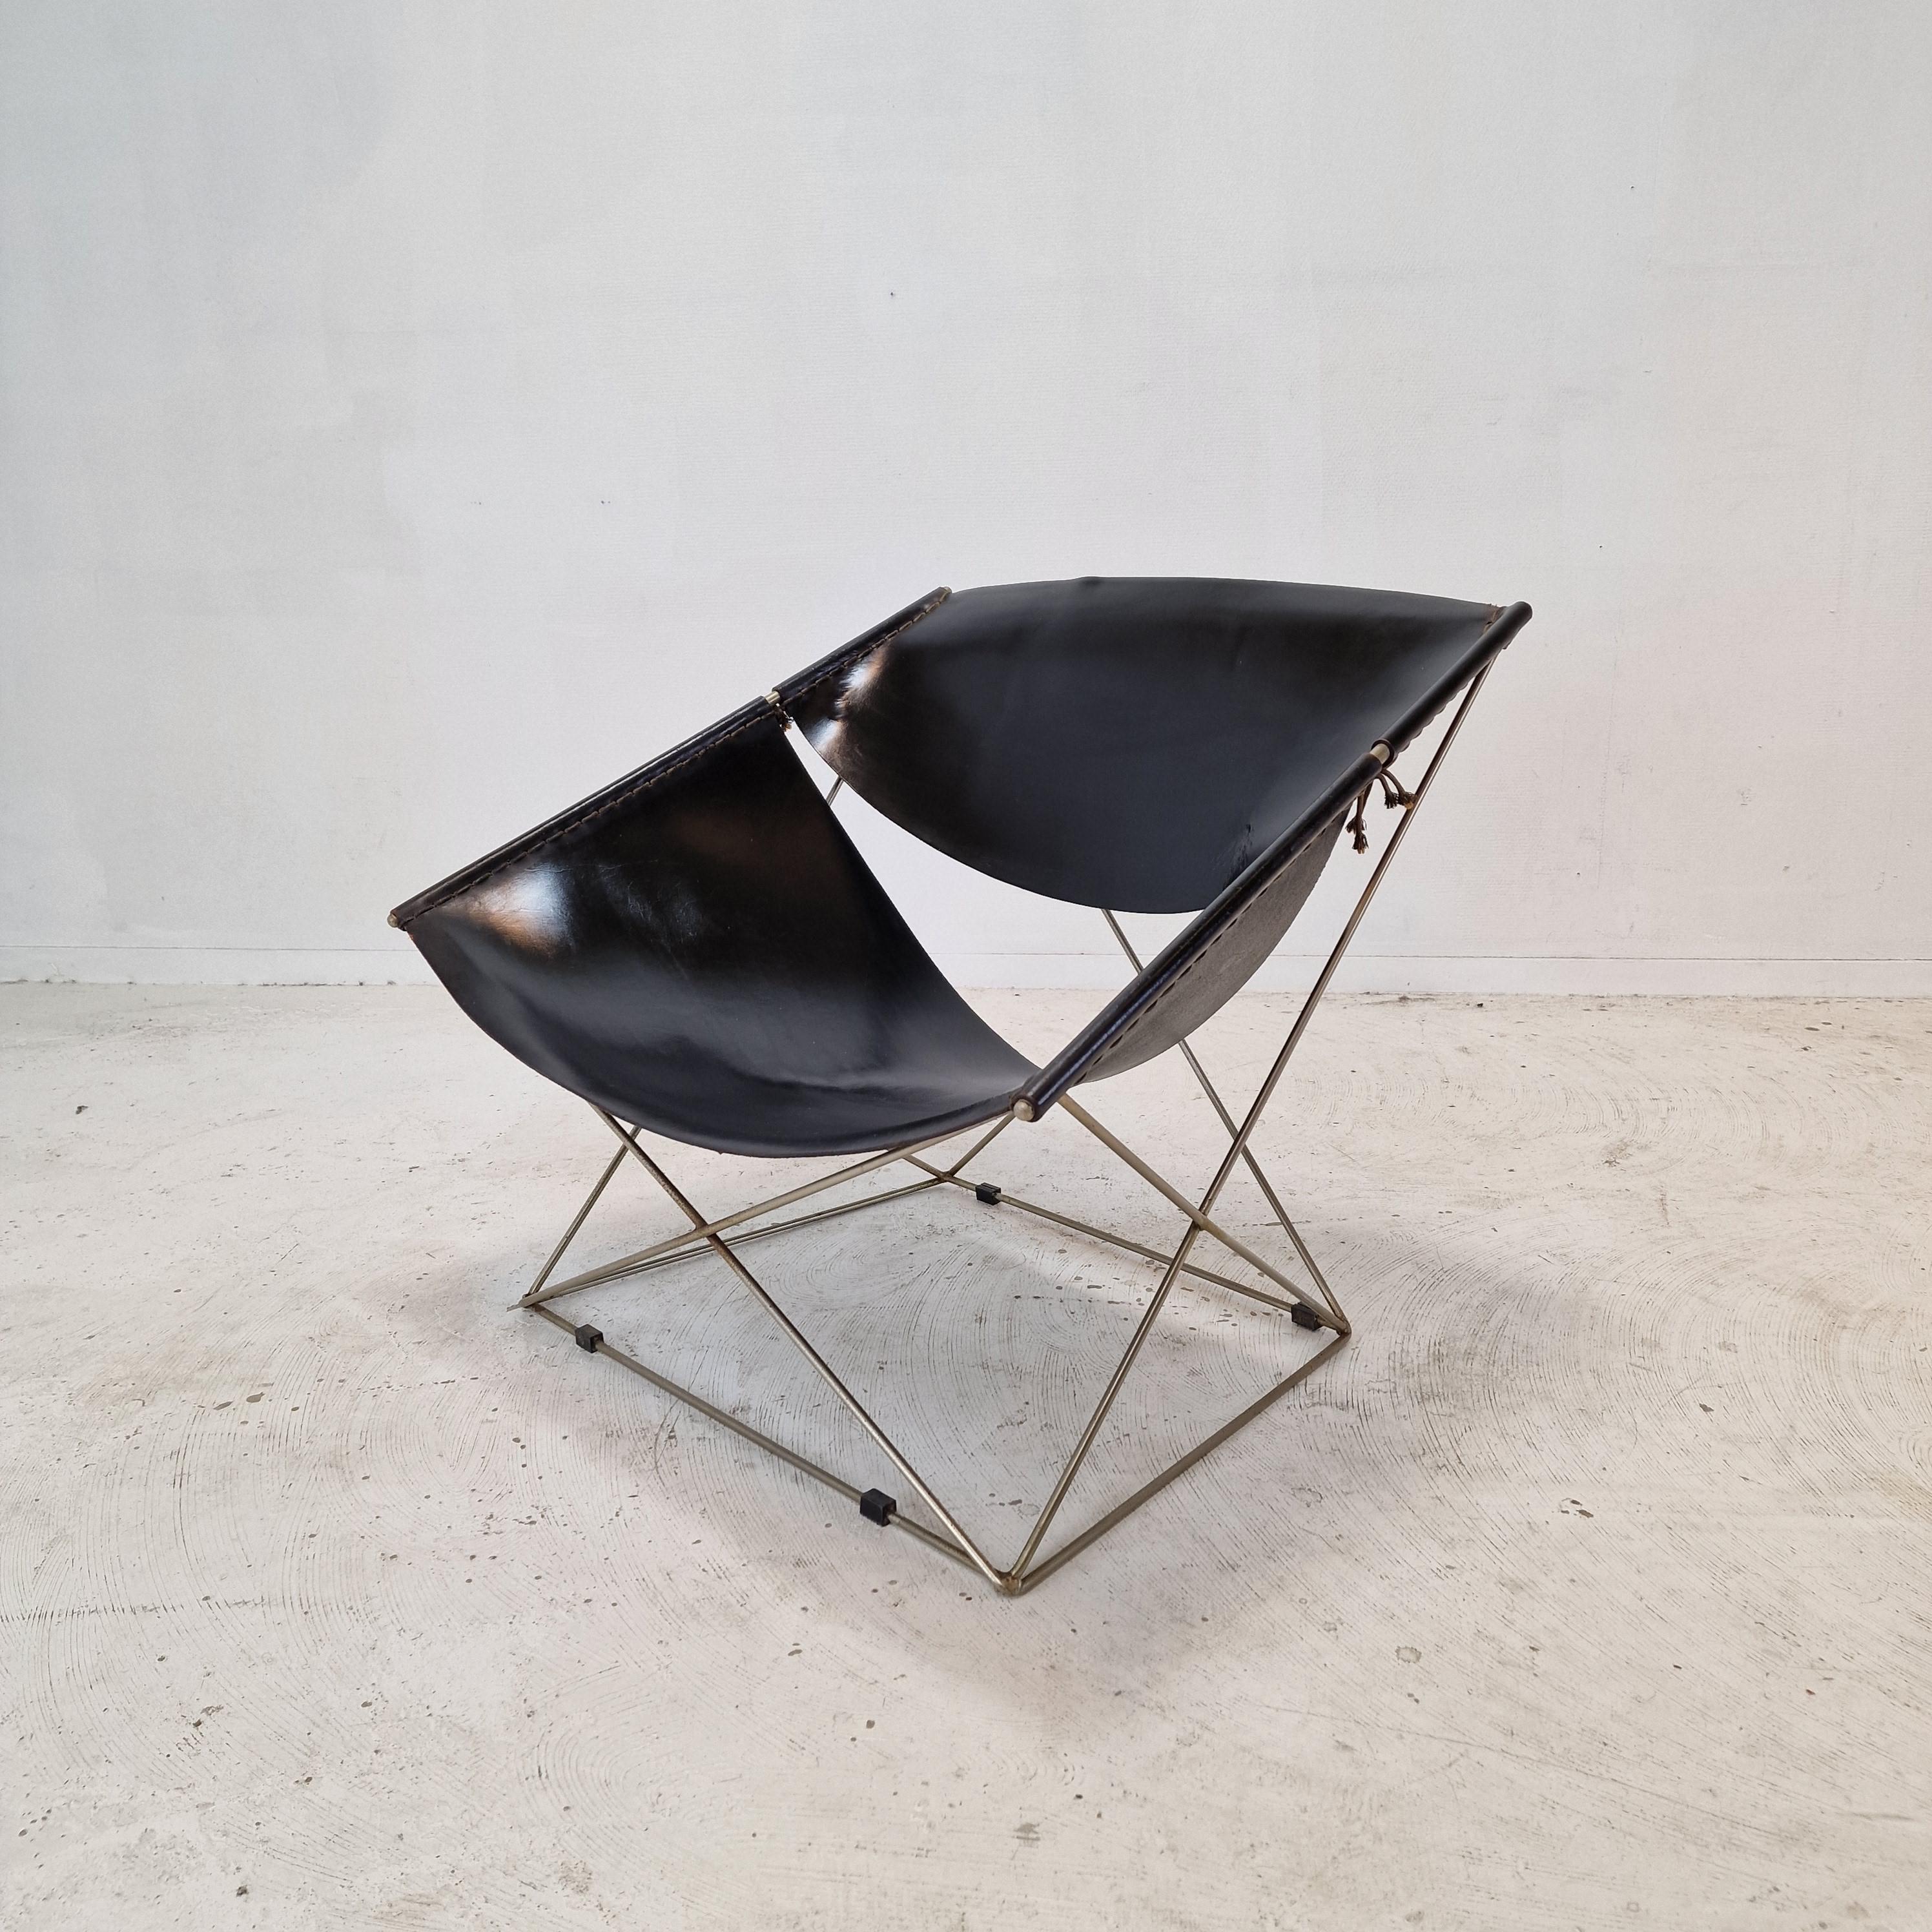 This stunning easy chair named 